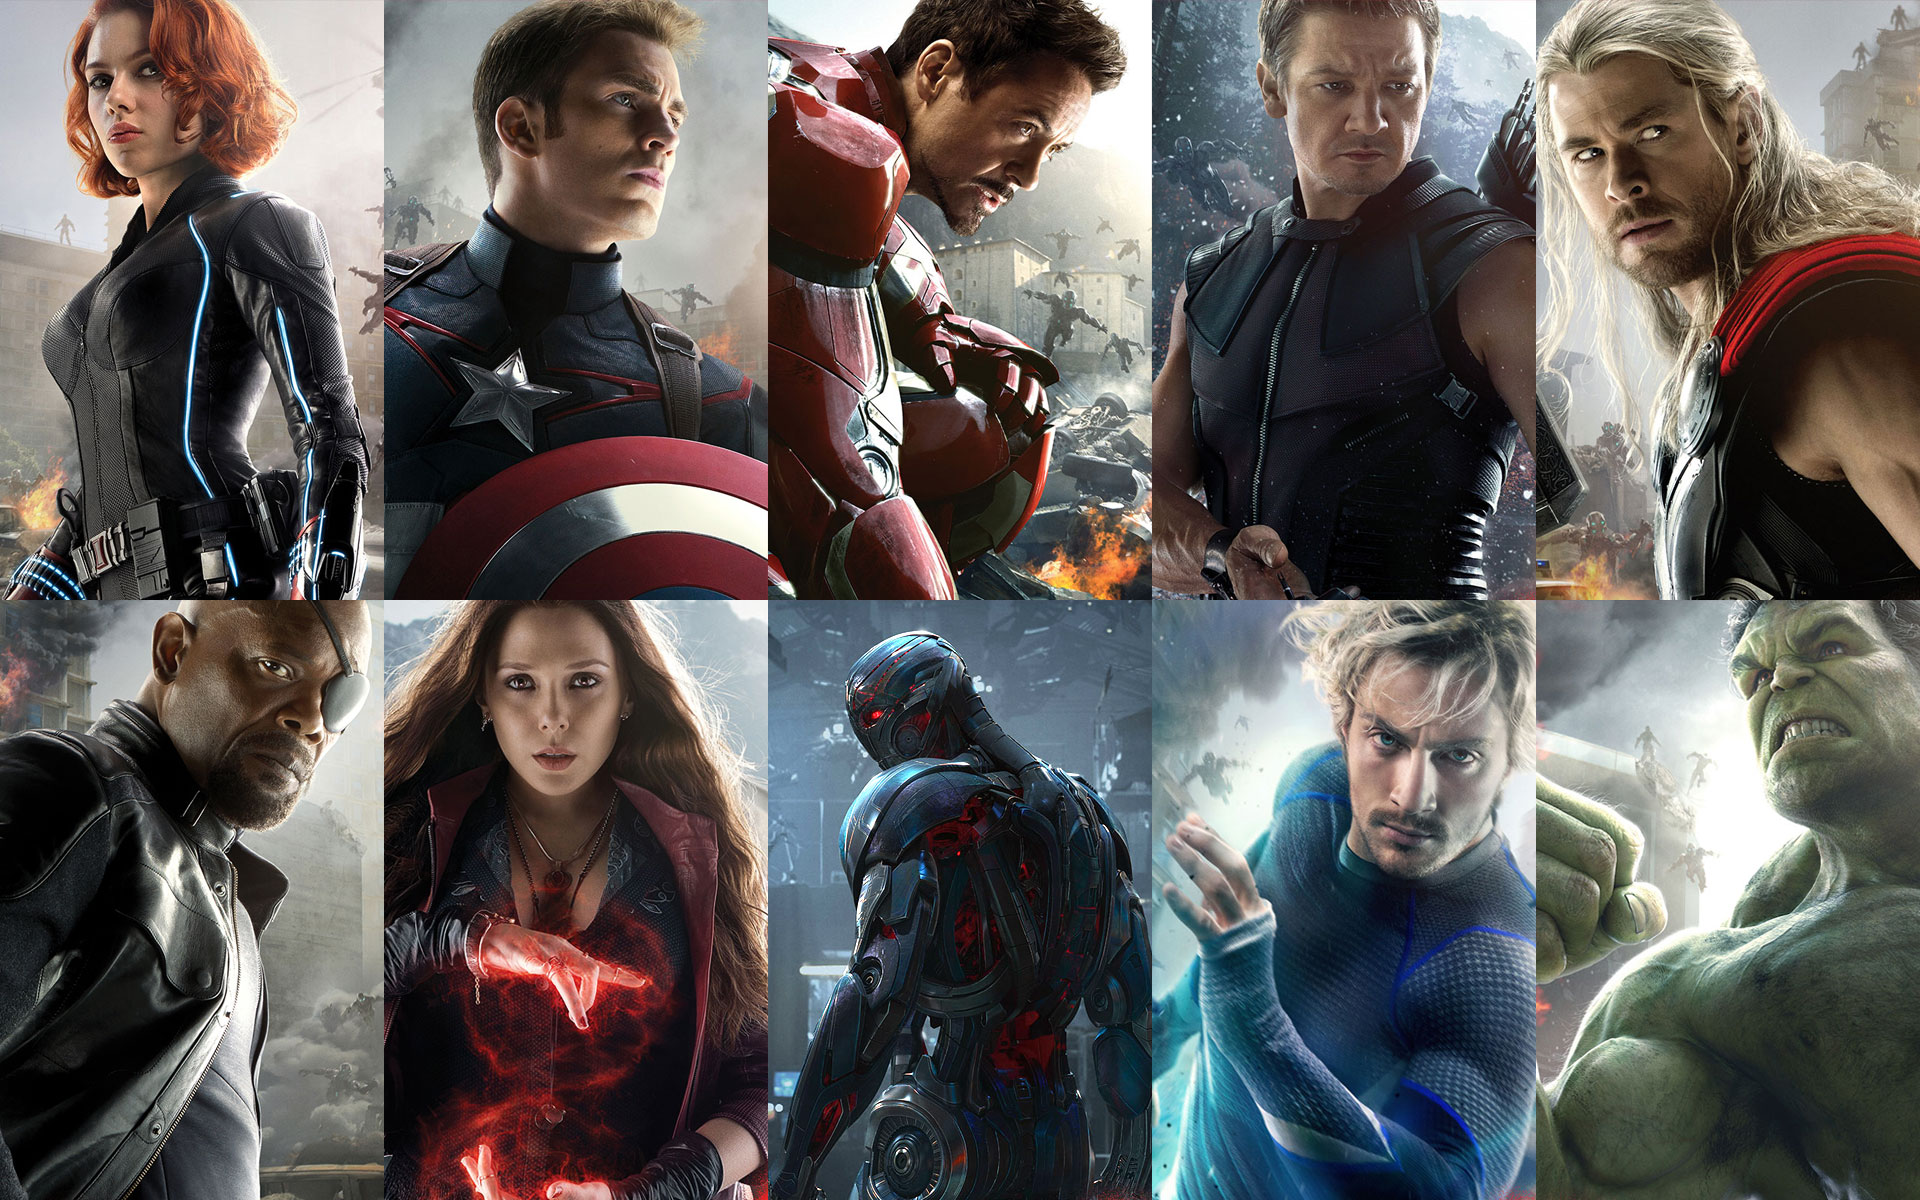 Avengers age of ultron characters